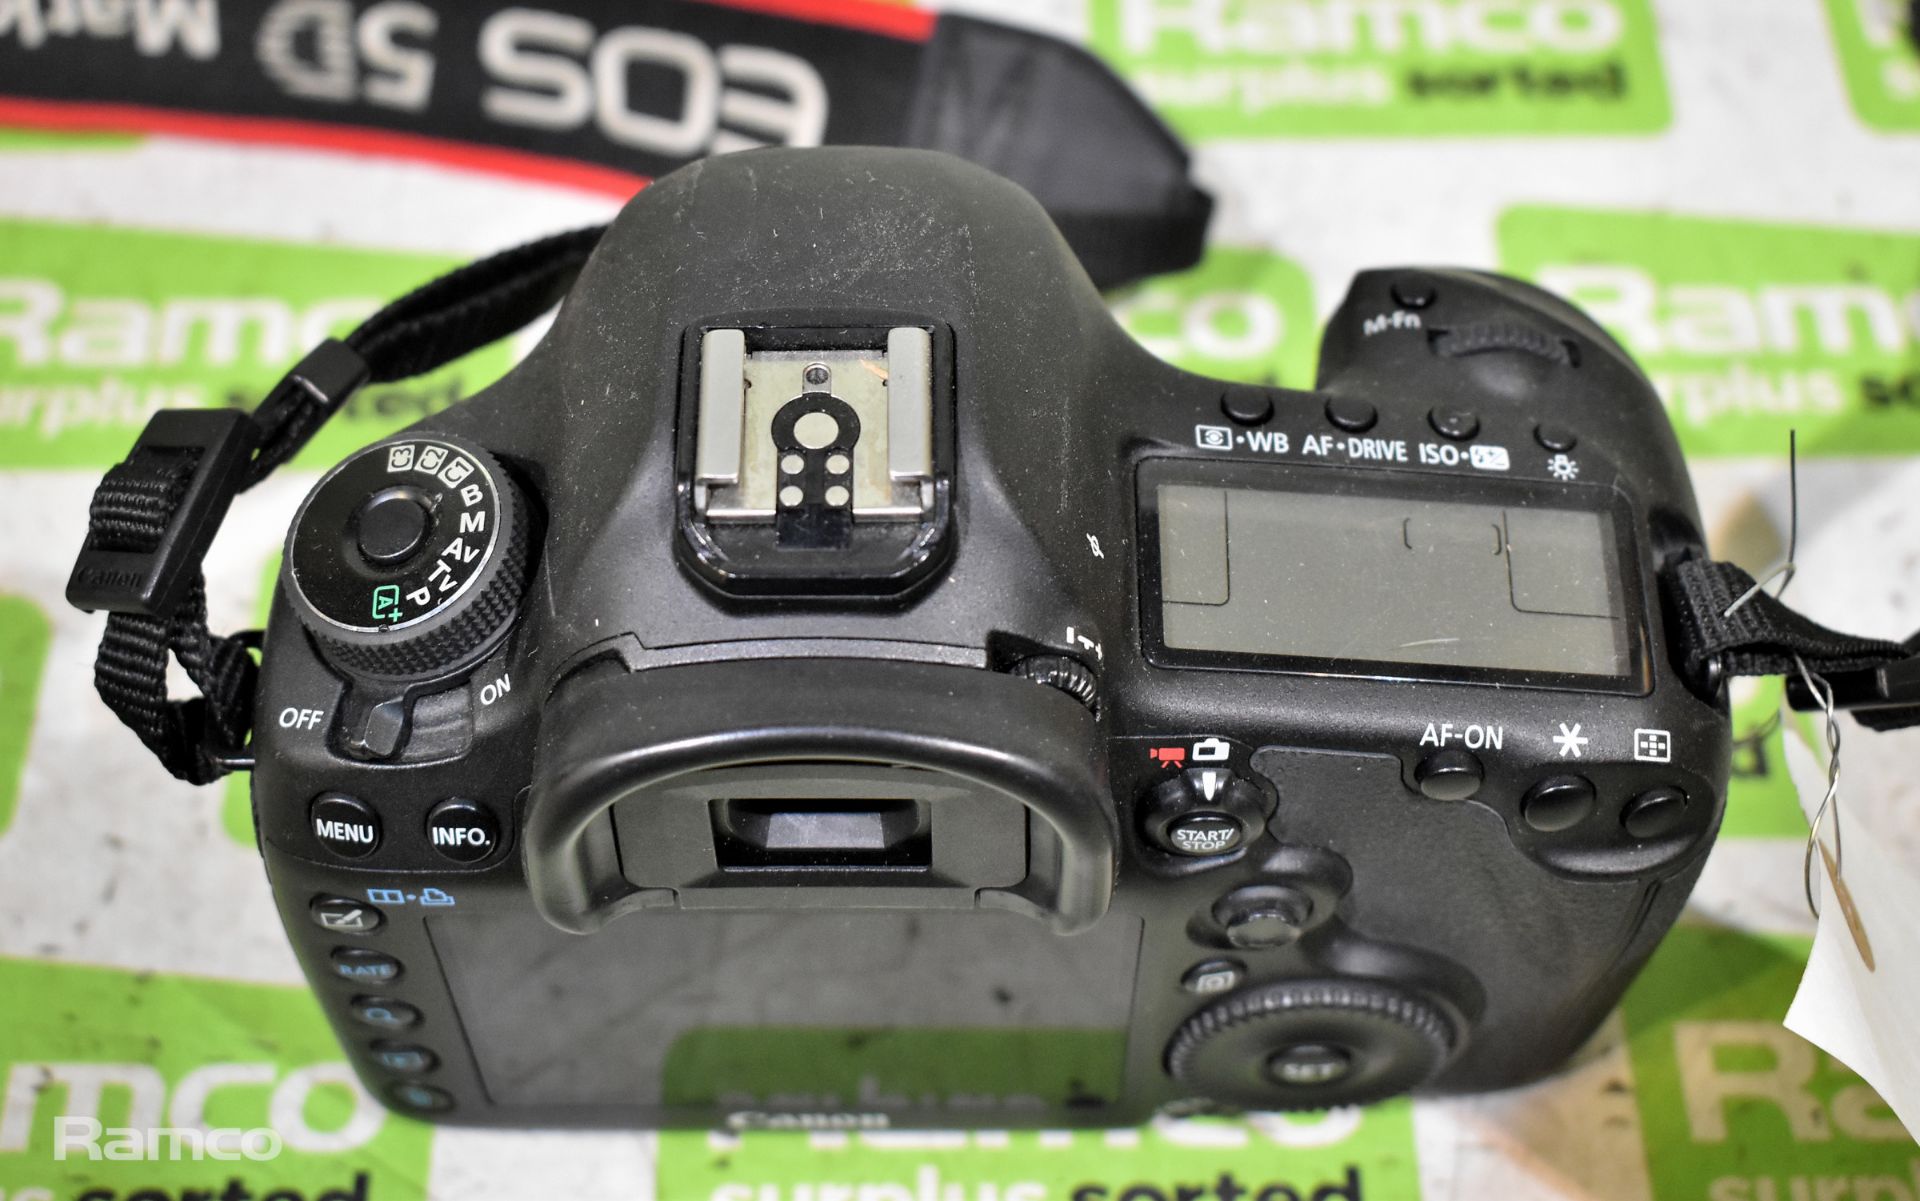 Canon EOS 5D Mark lll DSLR camera (no battery) - Image 7 of 9